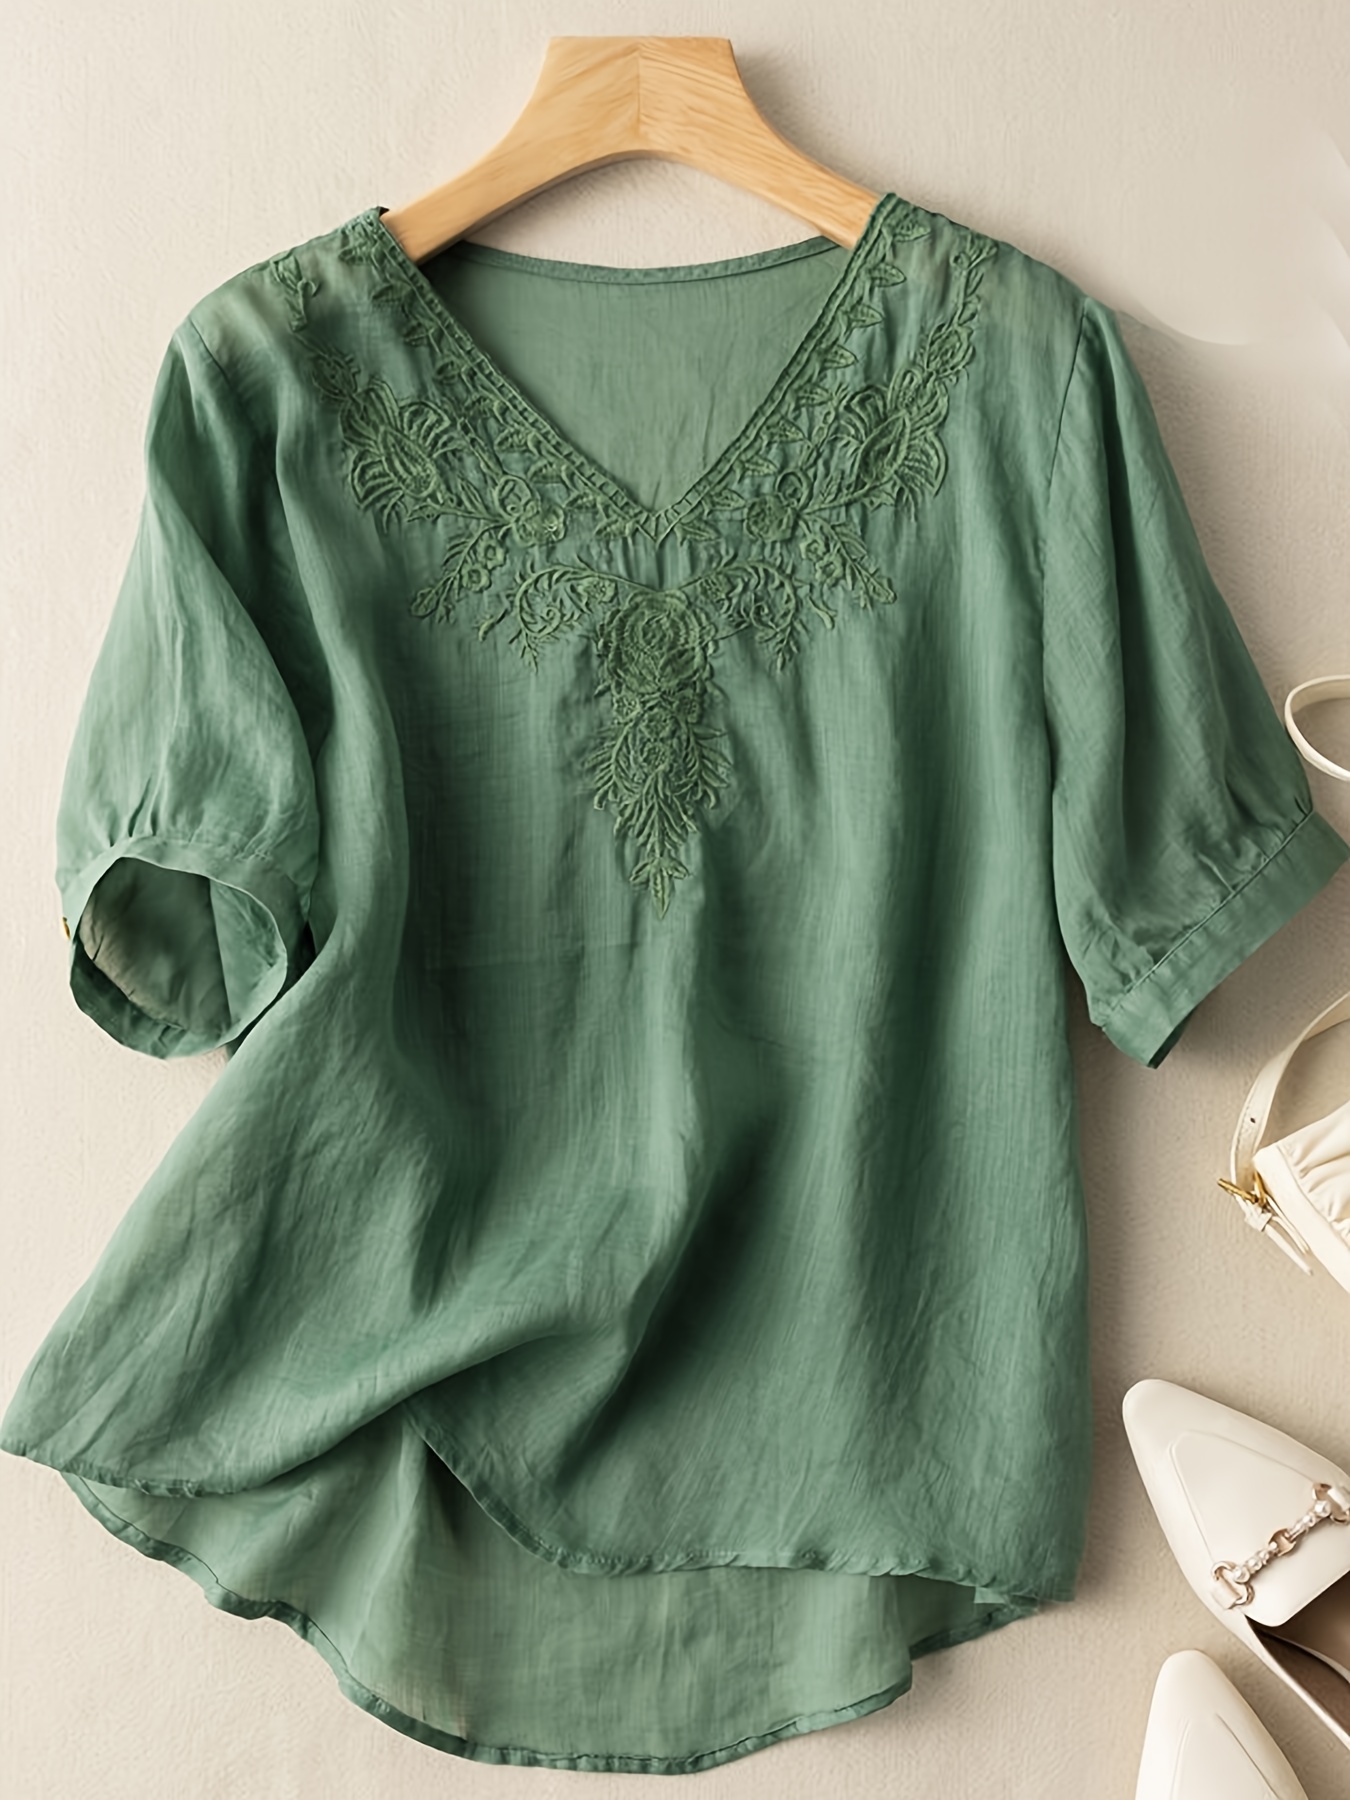 Vintage Loose Tops Ladies Casual V-neck Cotton Floral Embroidery